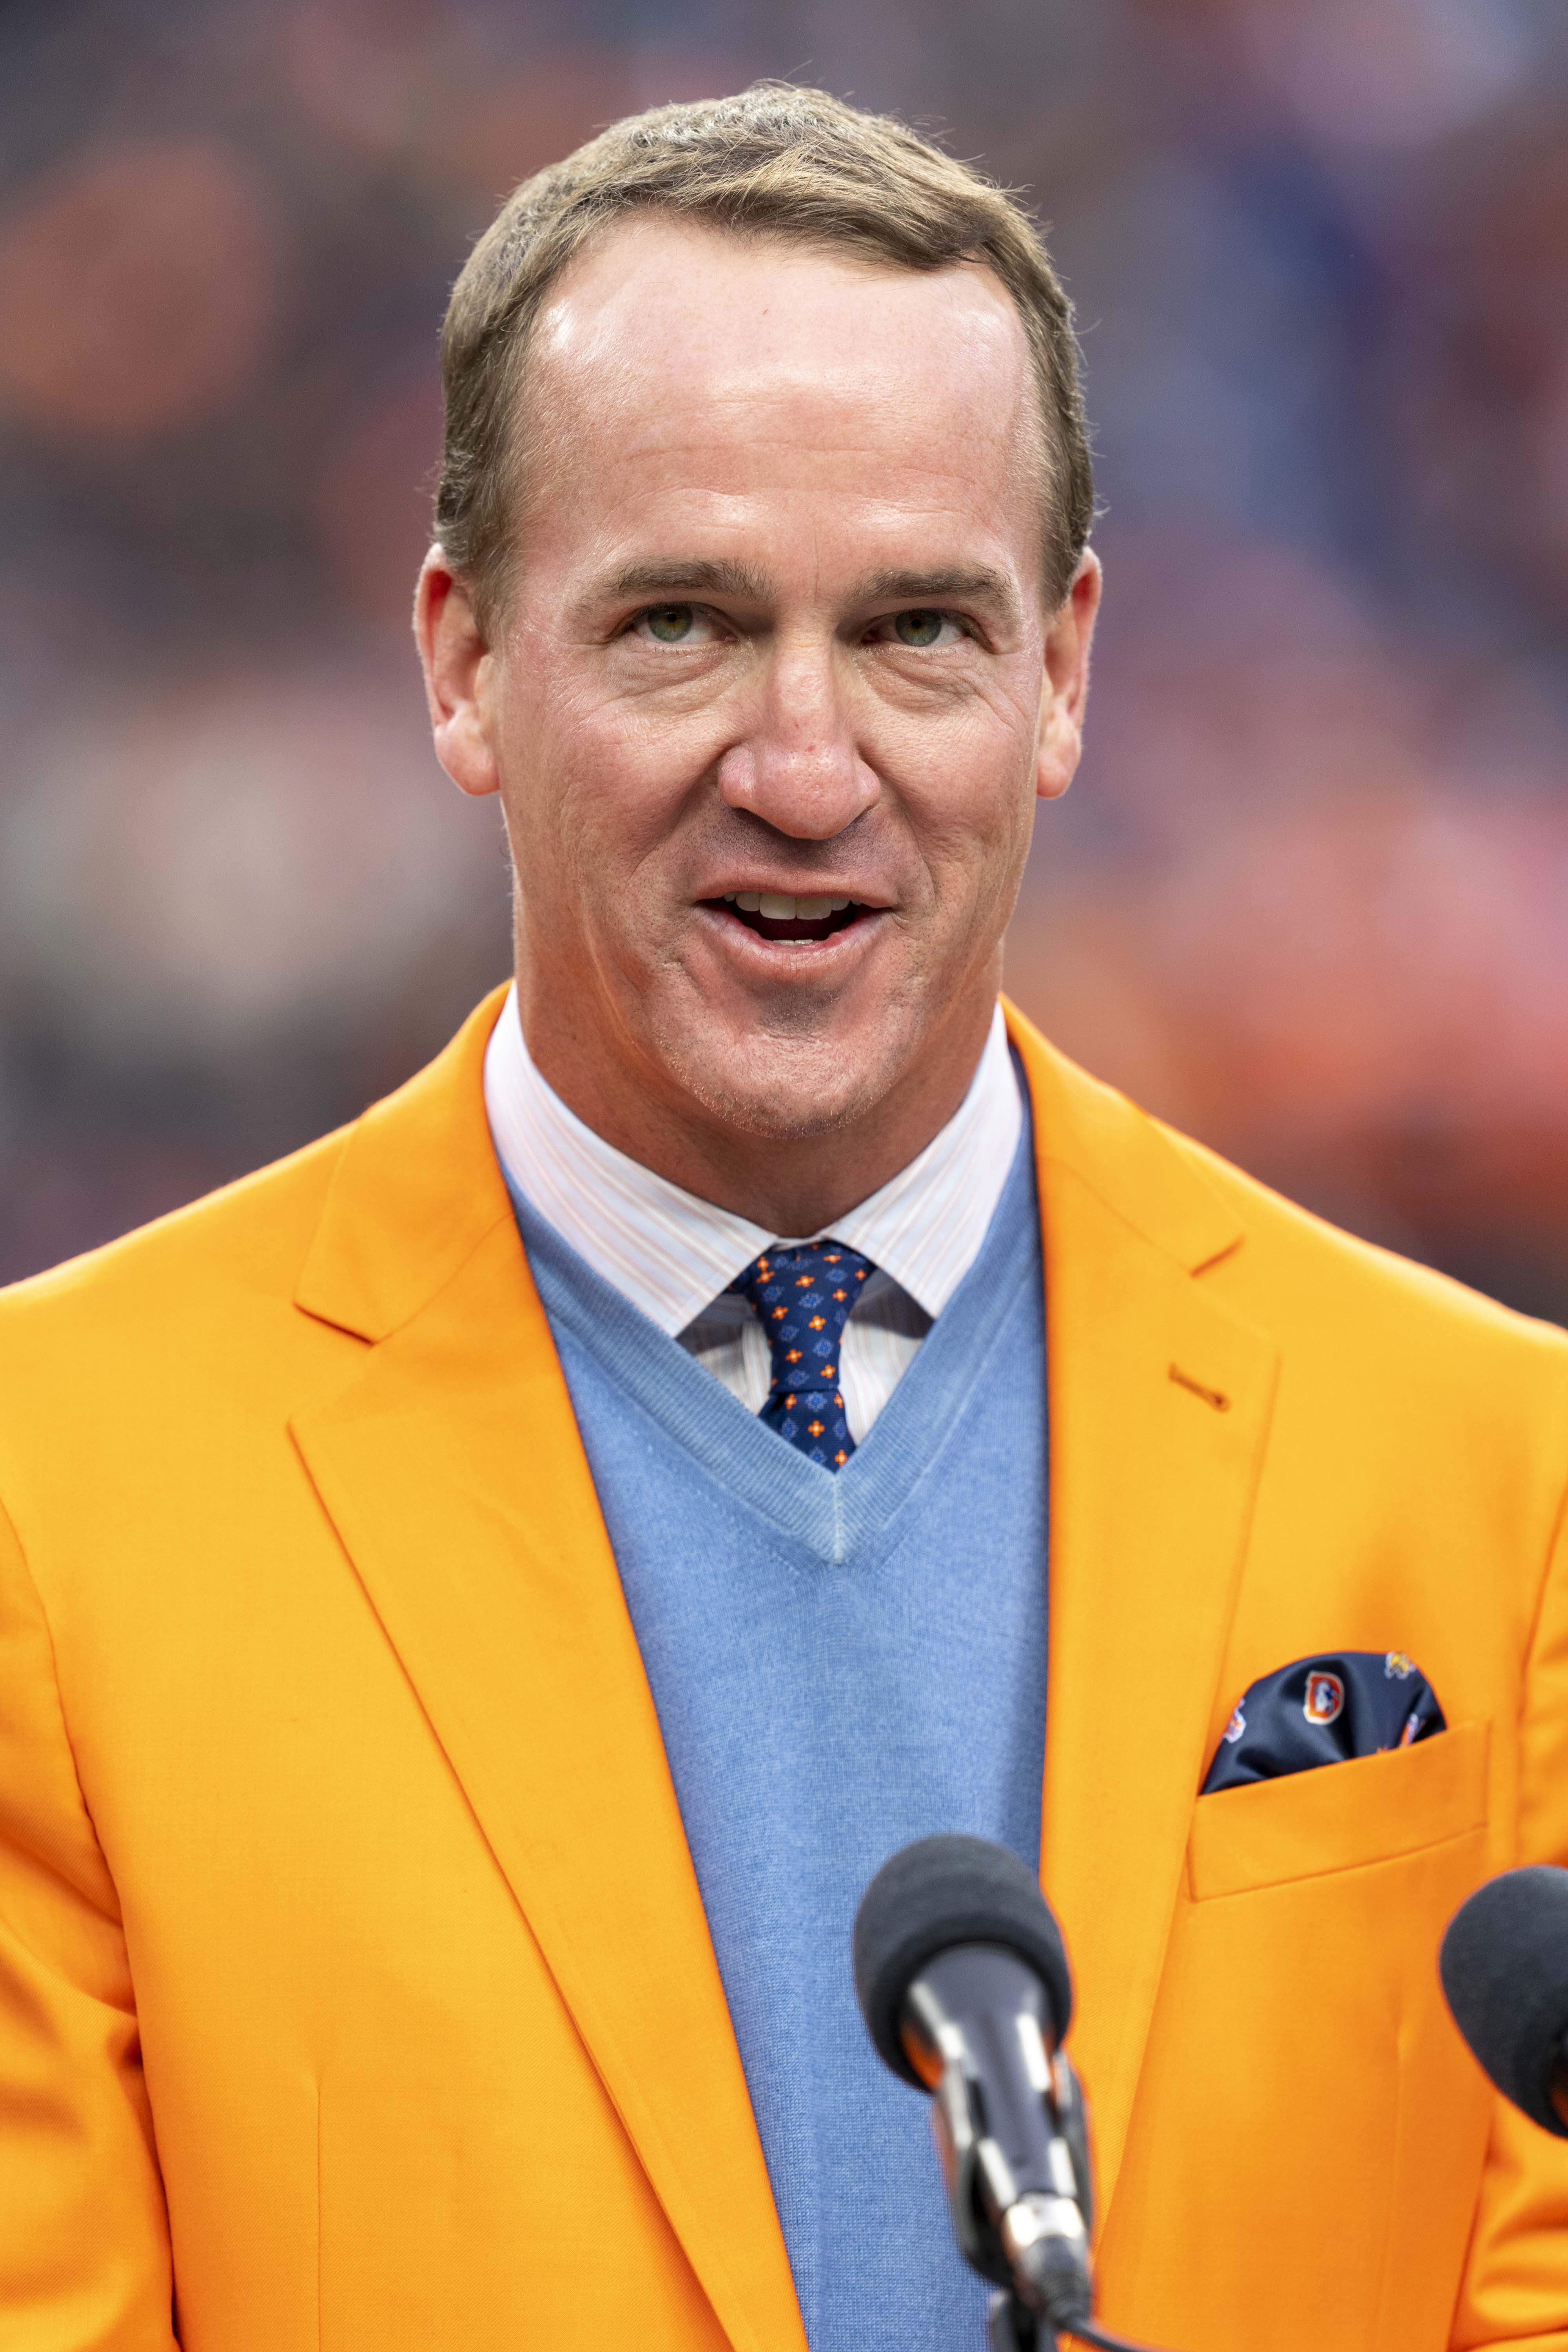 Which university did Peyton Manning attend?